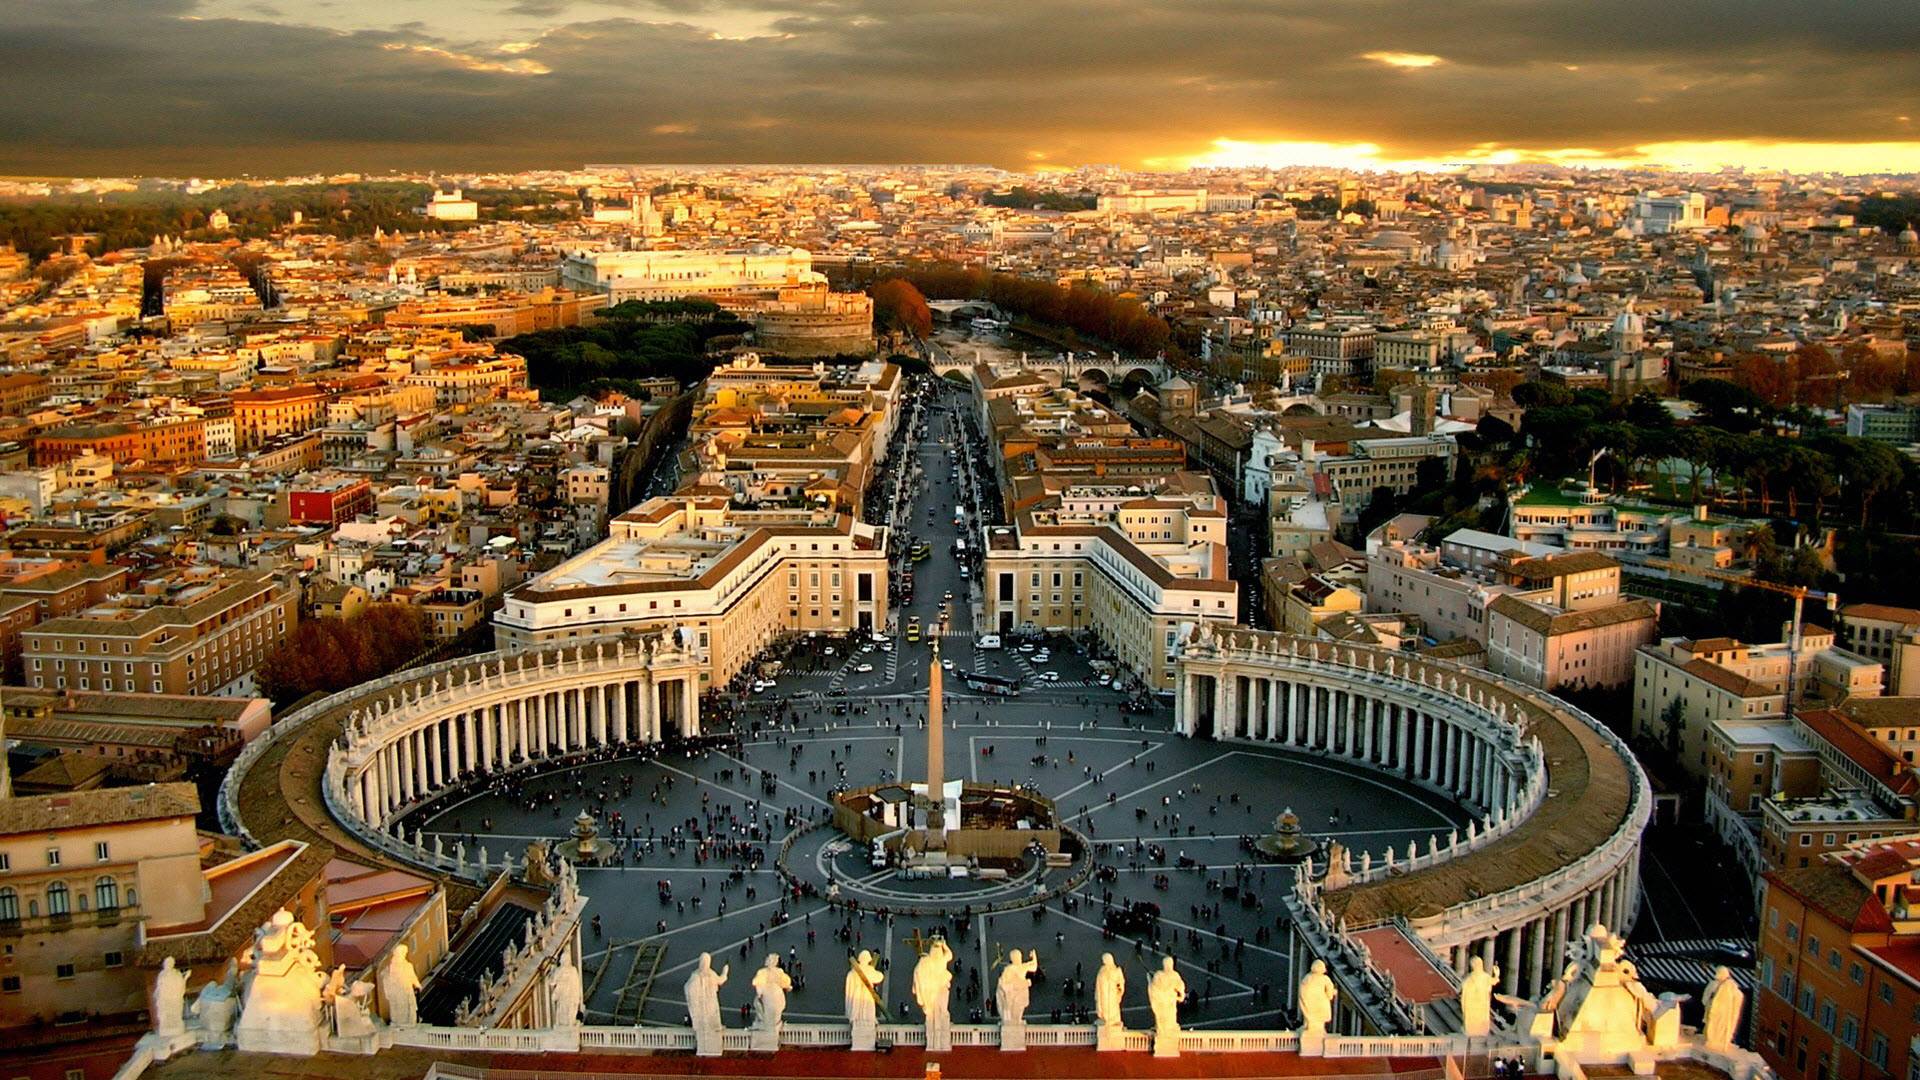 St. Peter's Square will be the arrival point for all pilgrims getting to Rome for the Jubilee